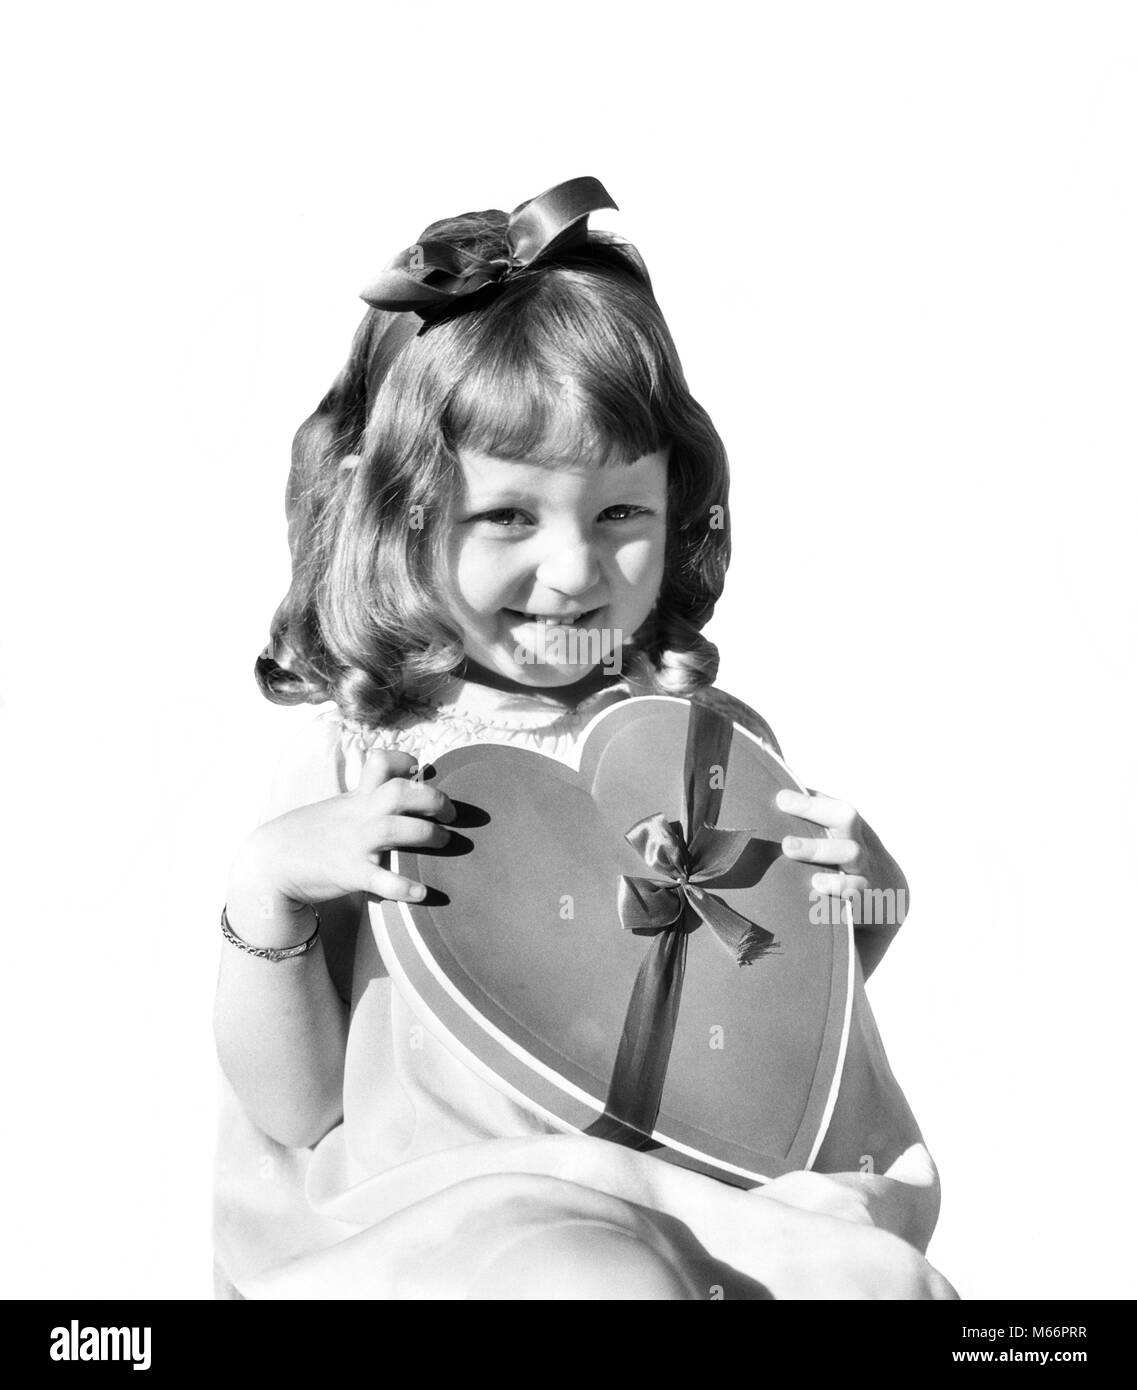 1930s SMILING GIRL JUVENILE HOLDING HEART SHAPED CANDY BOX LOOKING AT CAMERA - v157 HAR001 HARS FRIENDSHIP HALF-LENGTH VALENTINES INDOORS SHAPE SAINT NOSTALGIA EYE CONTACT 7-9 YEARS 5-6 YEARS HAPPINESS CHEERFUL EXCITEMENT VALENTINE'S SMILES JOYFUL ST. SYMBOLIC JUVENILES VALENTINES DAY B&W BLACK AND WHITE CANDIES CAUCASIAN ETHNICITY FEAST DAY FEBRUARY 14 HEART-SHAPED LOOKING AT CAMERA OLD FASHIONED ST. VALENTINE Stock Photo